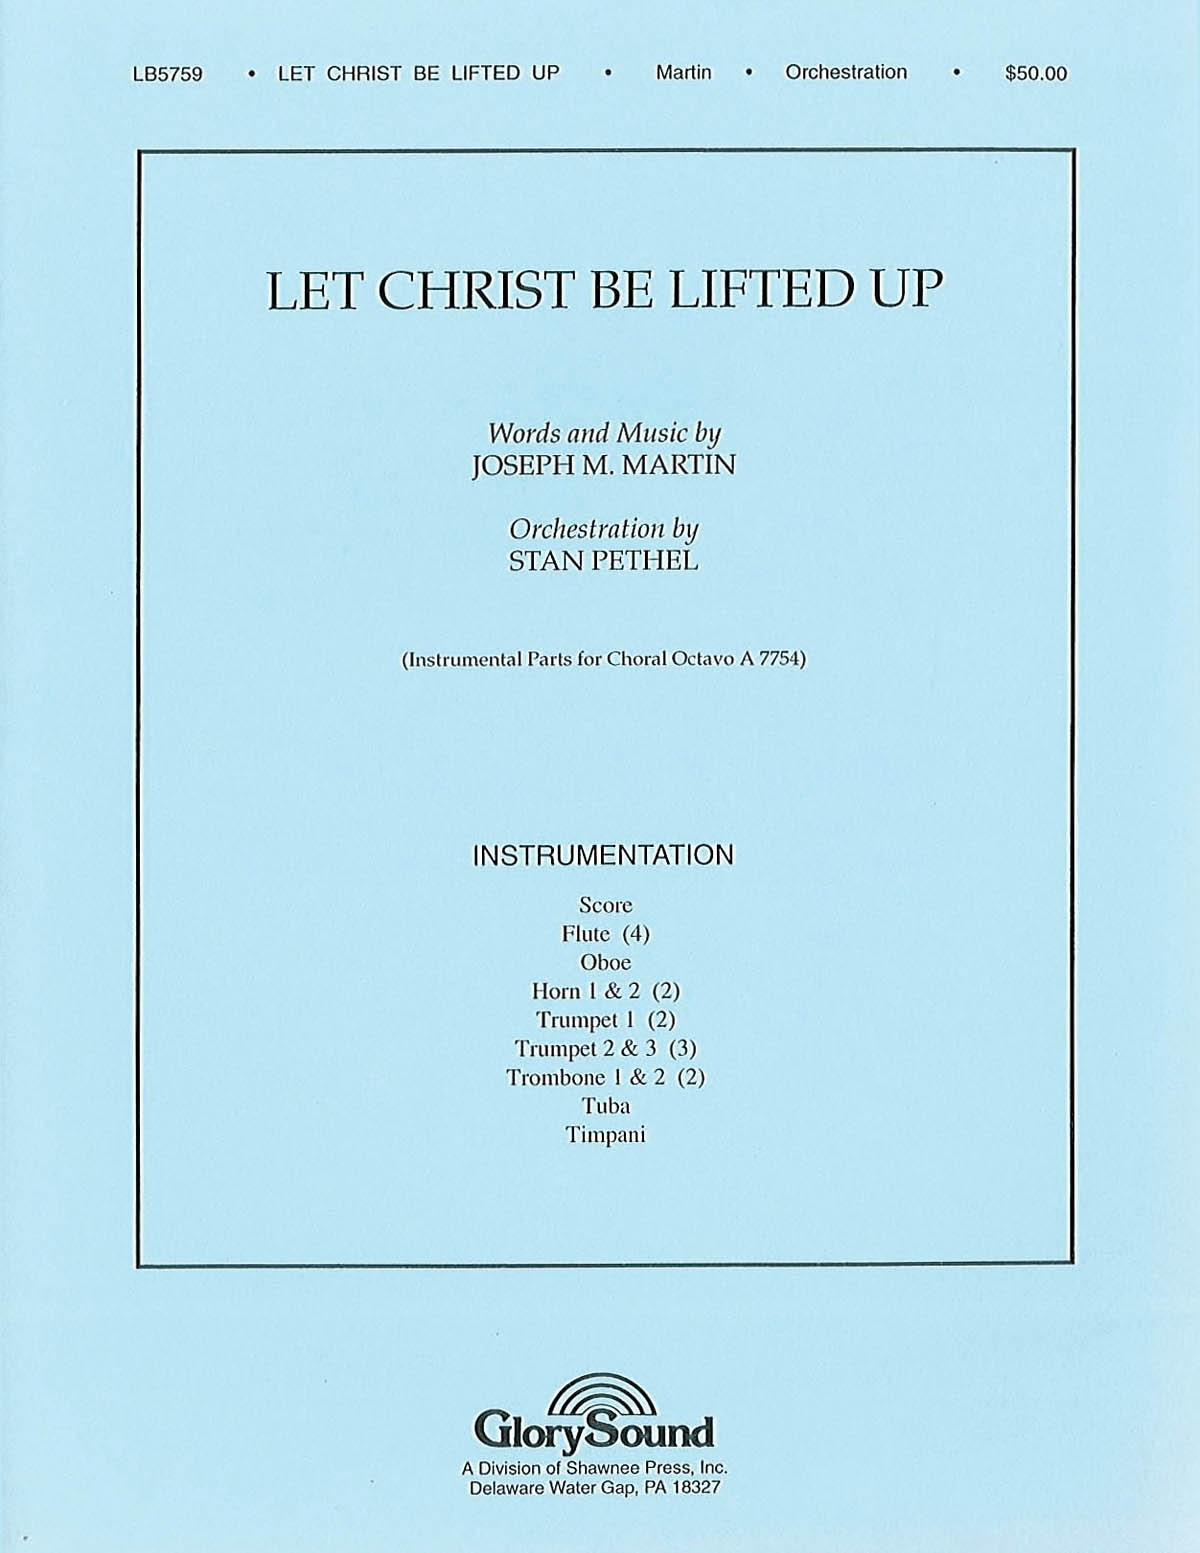 Joseph M. Martin: Let Christ Be Lifted Up (Instrumental Parts)